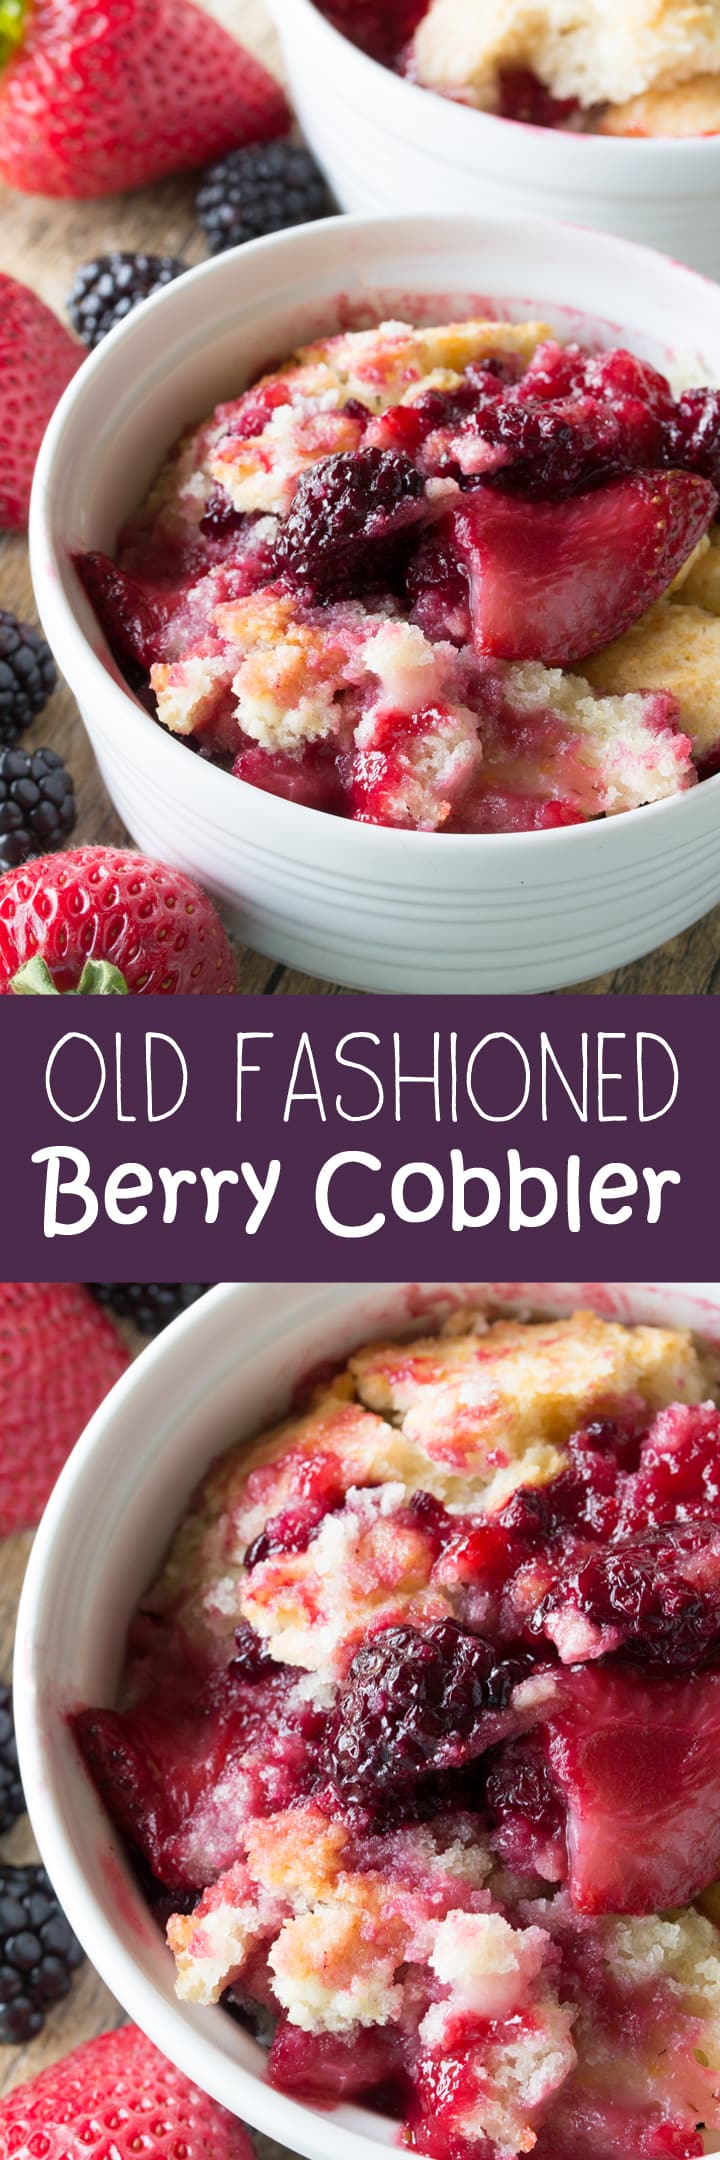 Old fashioned cobbler, made from scratch, is easier to make than you might think. 10 minutes of prep and you'll have the best cobbler of your life!